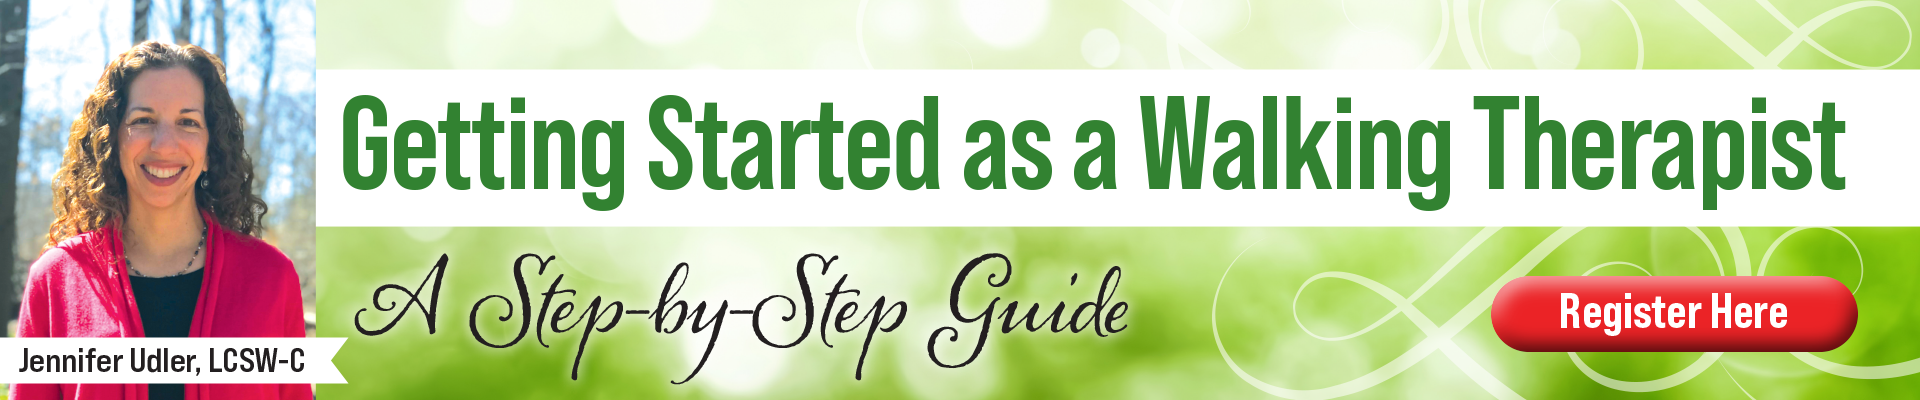 Getting Started as a Walking Therapist: